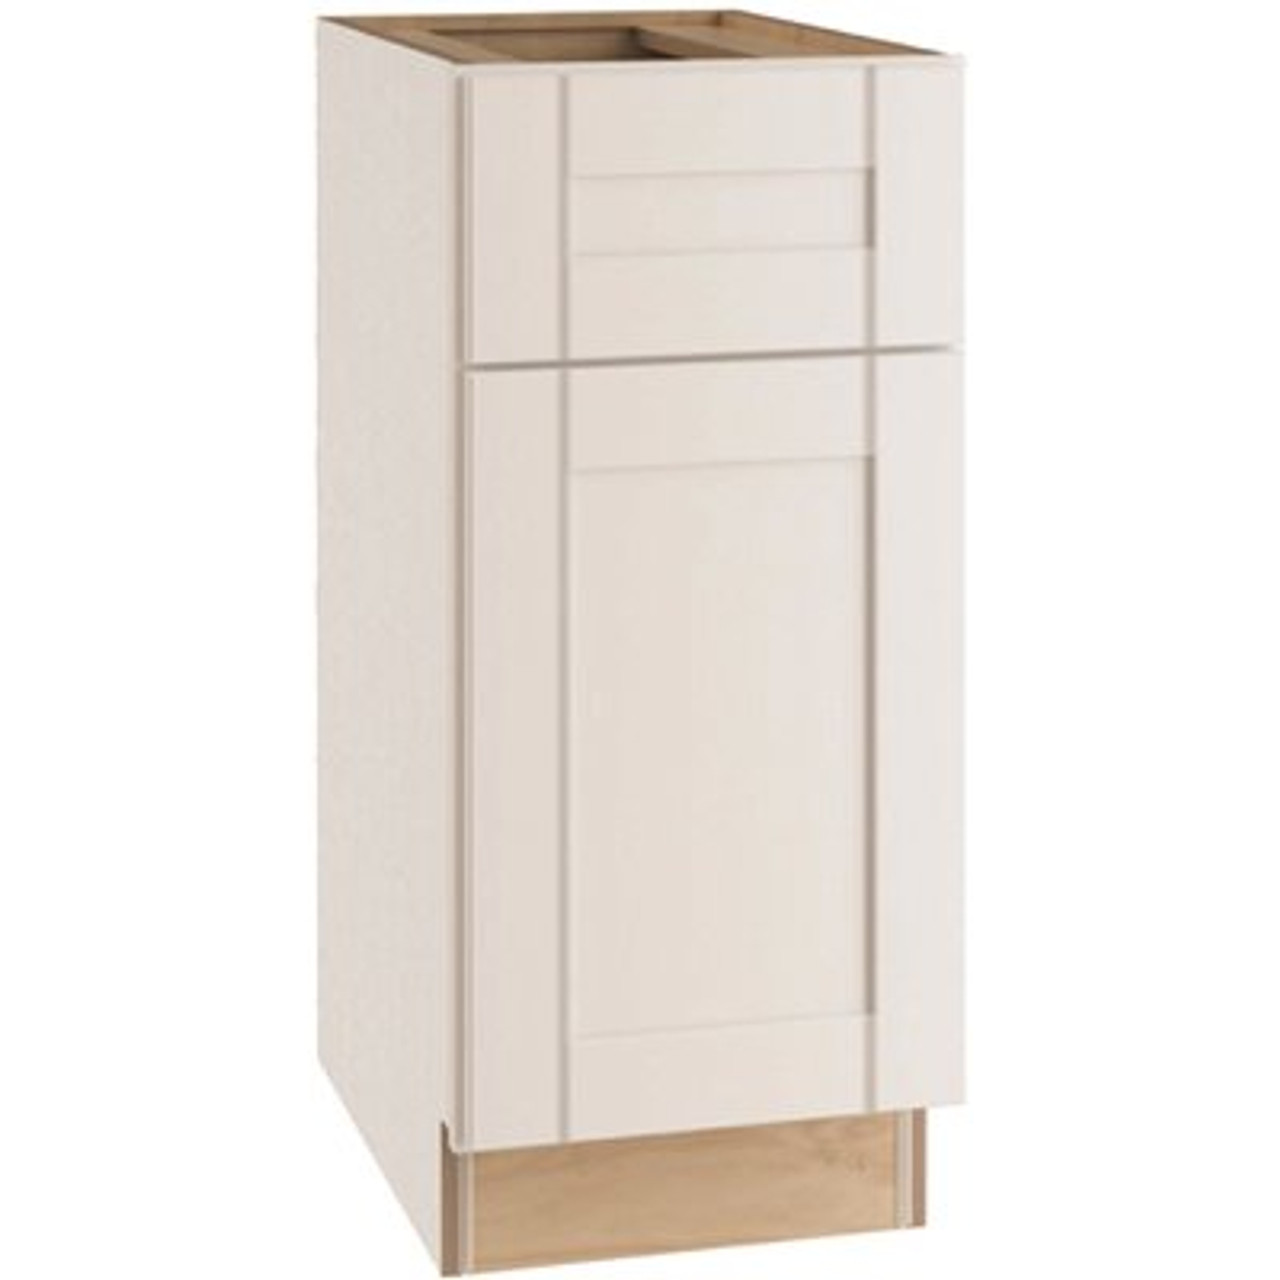 Arlington Vesper White Shaker Assembled Plywood Base Kitchen Cabinet With Soft Close 21 In. X 34.5 In. X 24 In.